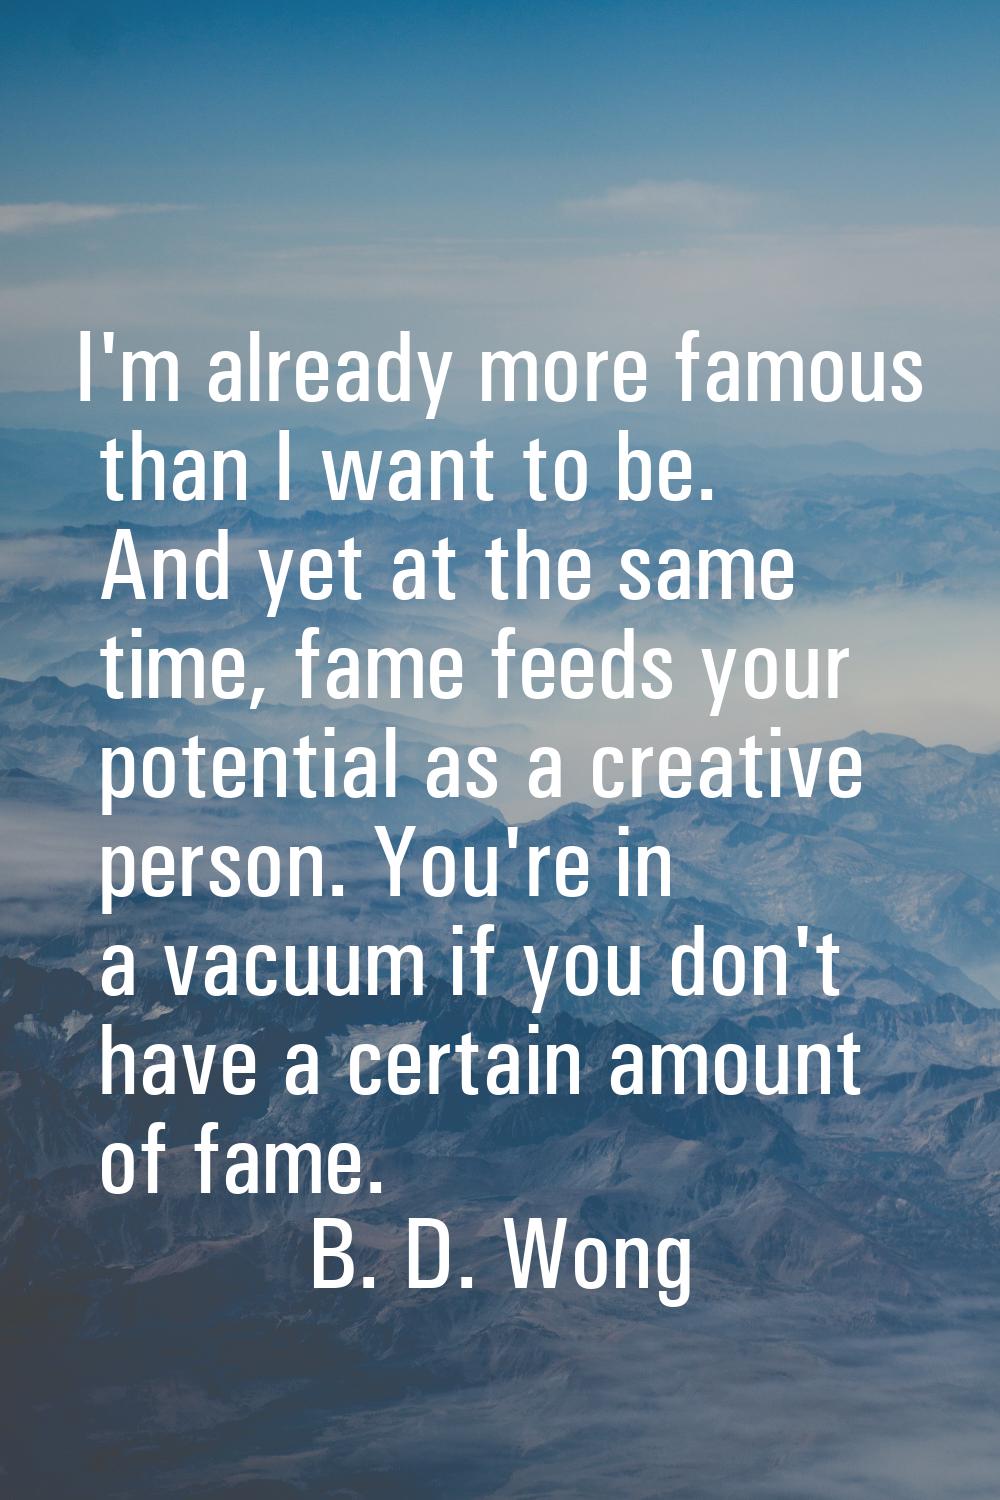 I'm already more famous than I want to be. And yet at the same time, fame feeds your potential as a